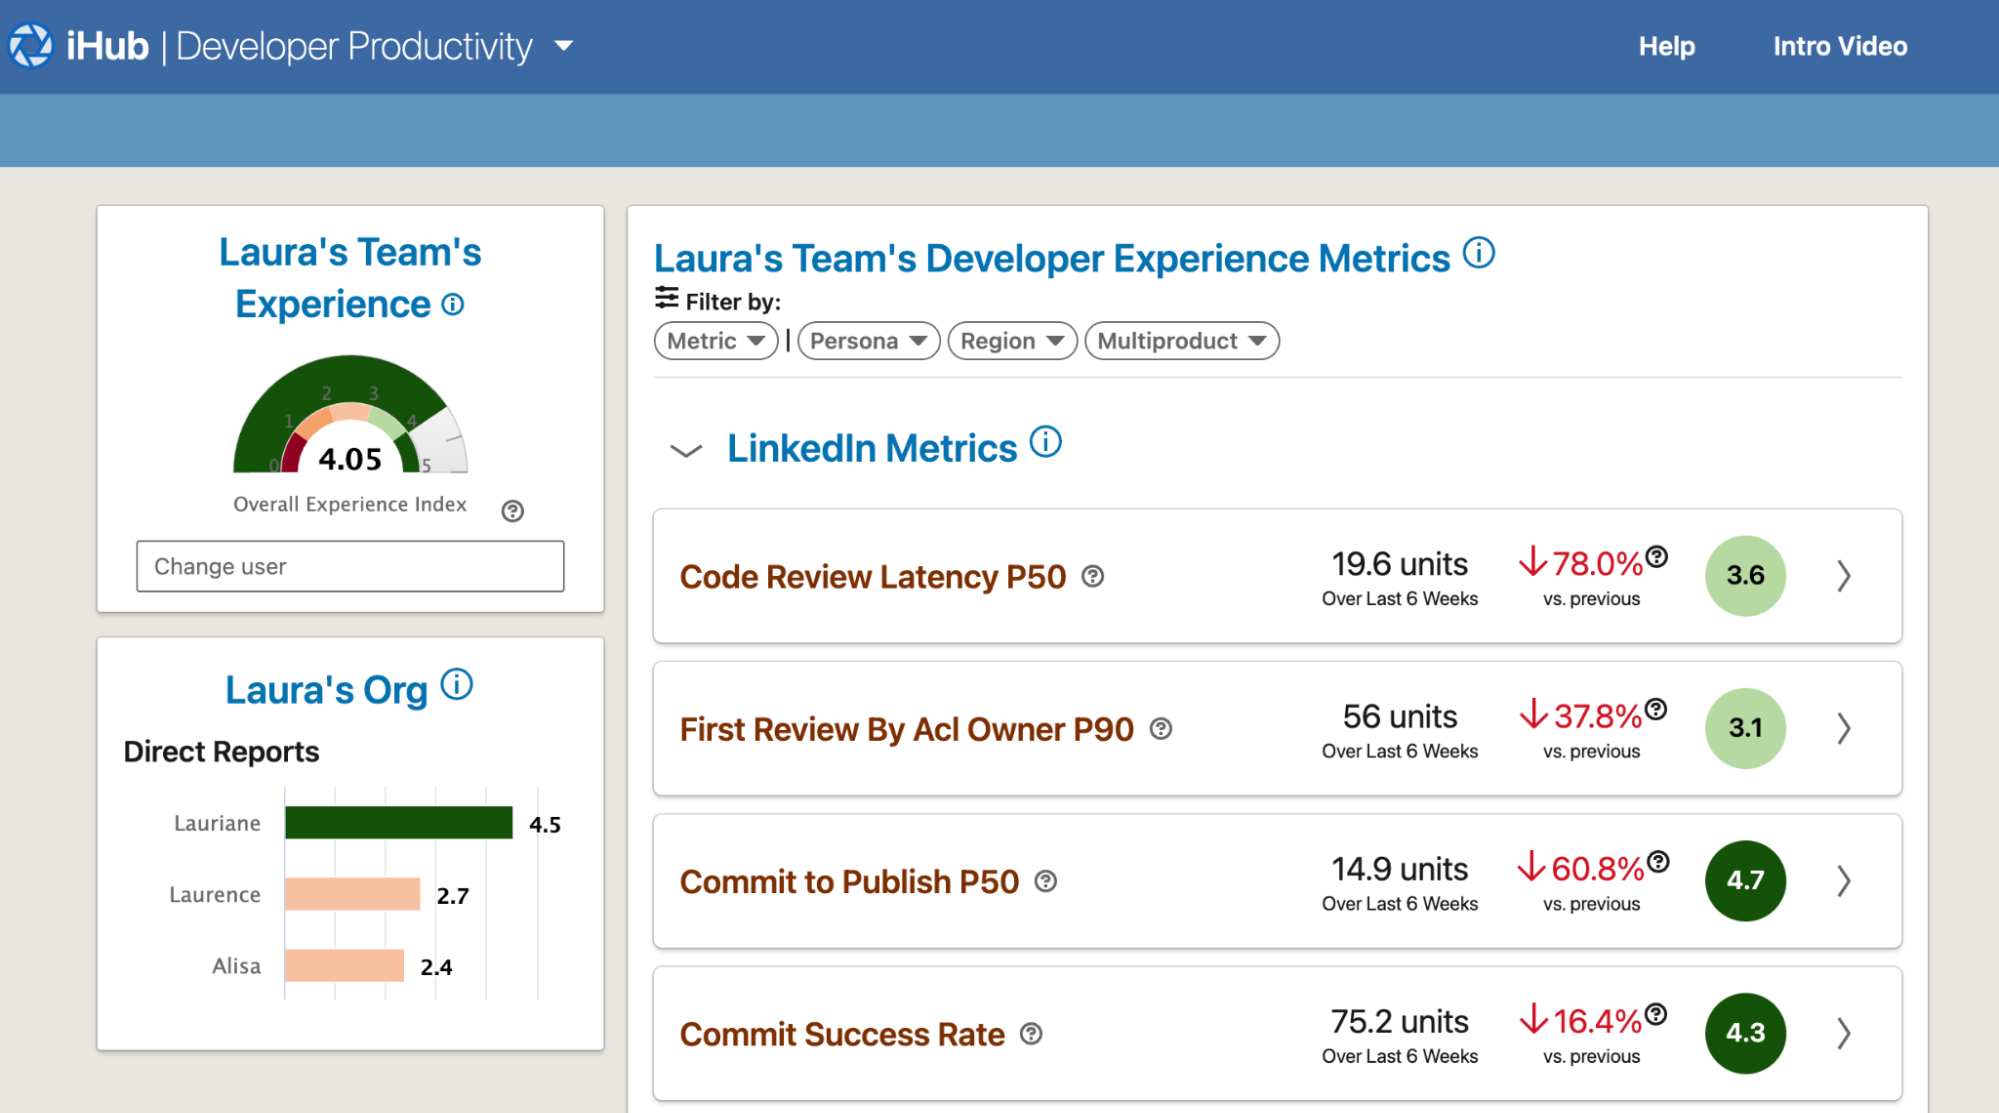 Image of eam’s landing page showing a list of relevant metrics and org based navigation on the left side bar